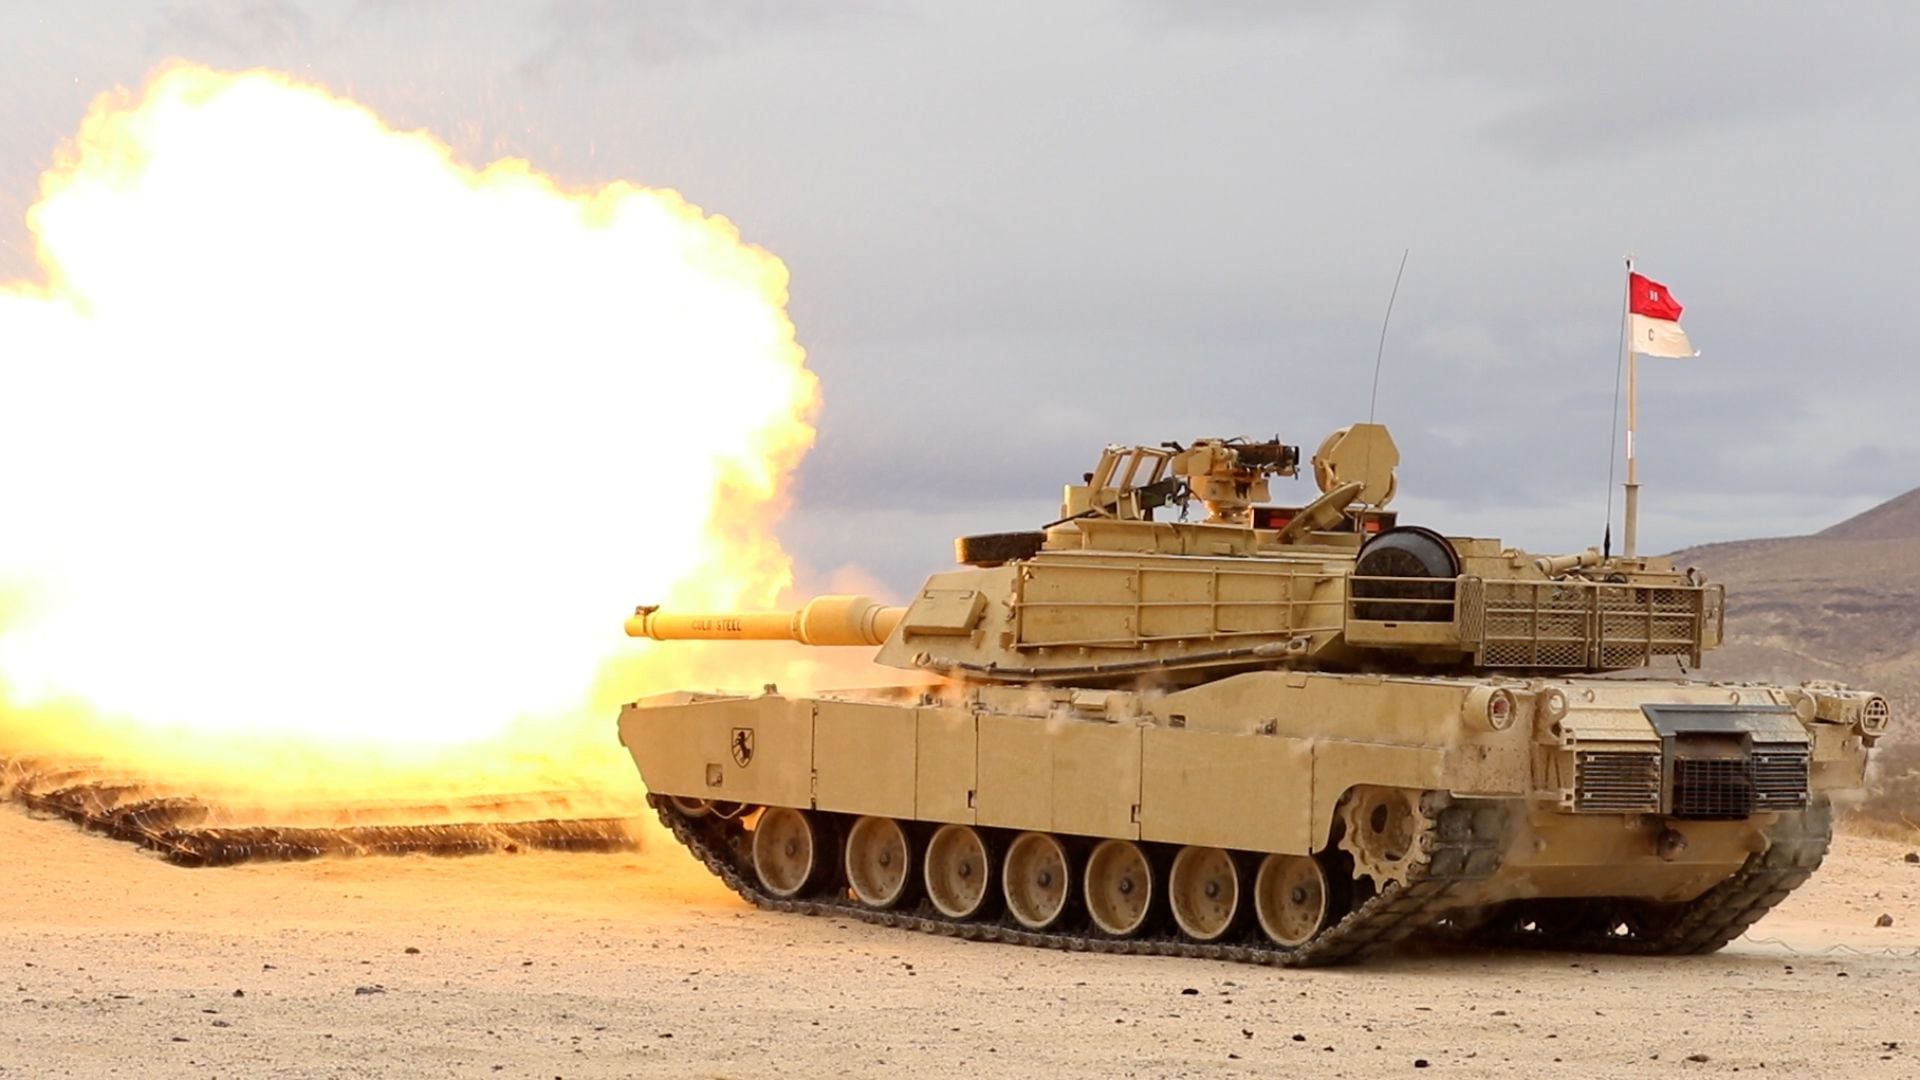 The Army is going all-in on its souped-up new M1 Abrams tank